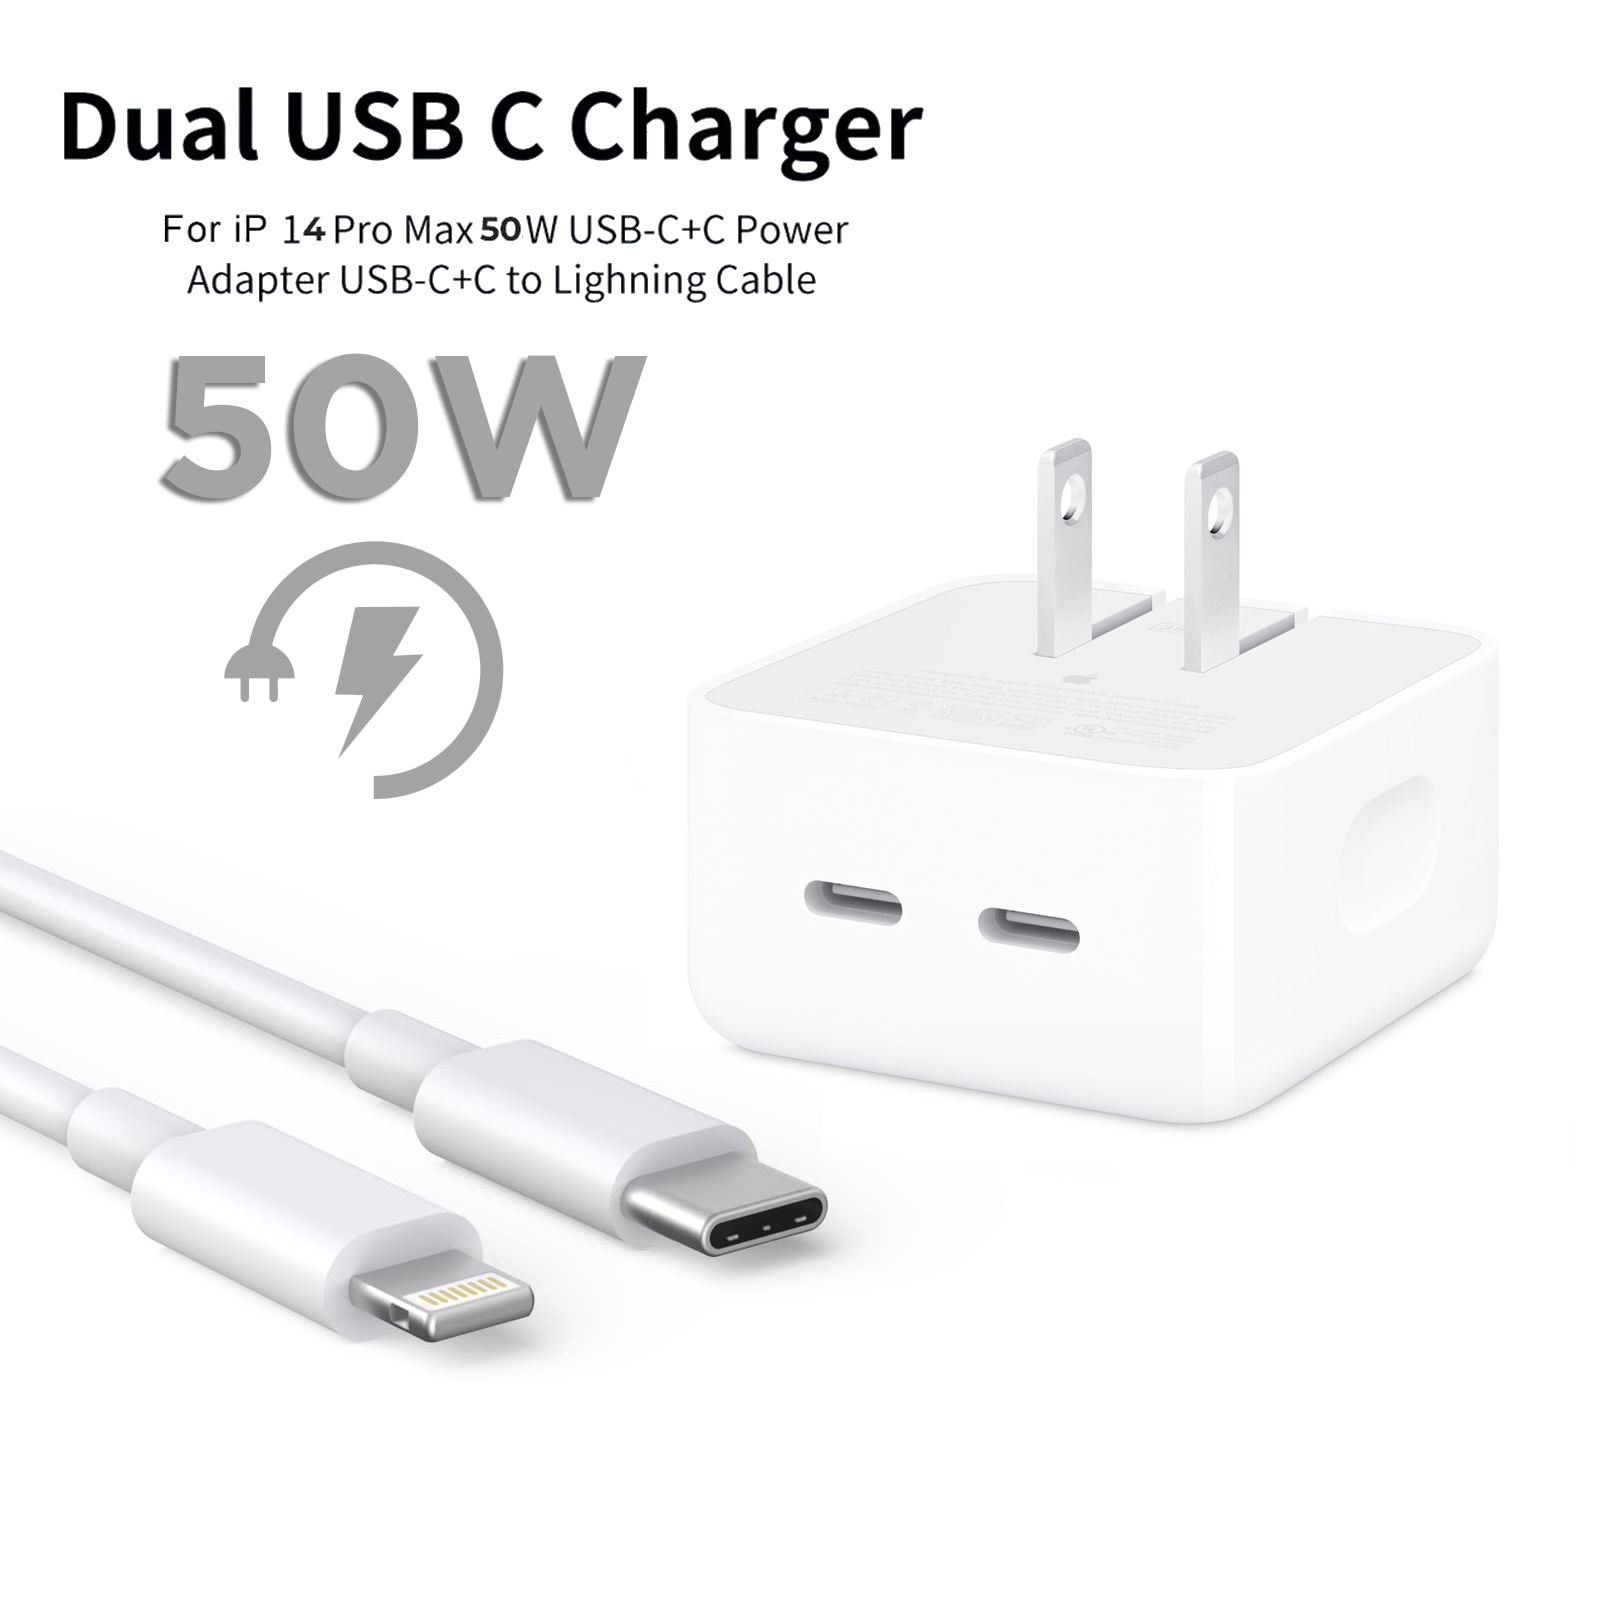 iphone-14-pro-2-pin-us-pin-50w-usb-cc-power-adapter-with-usb-c-to-lightining-cable